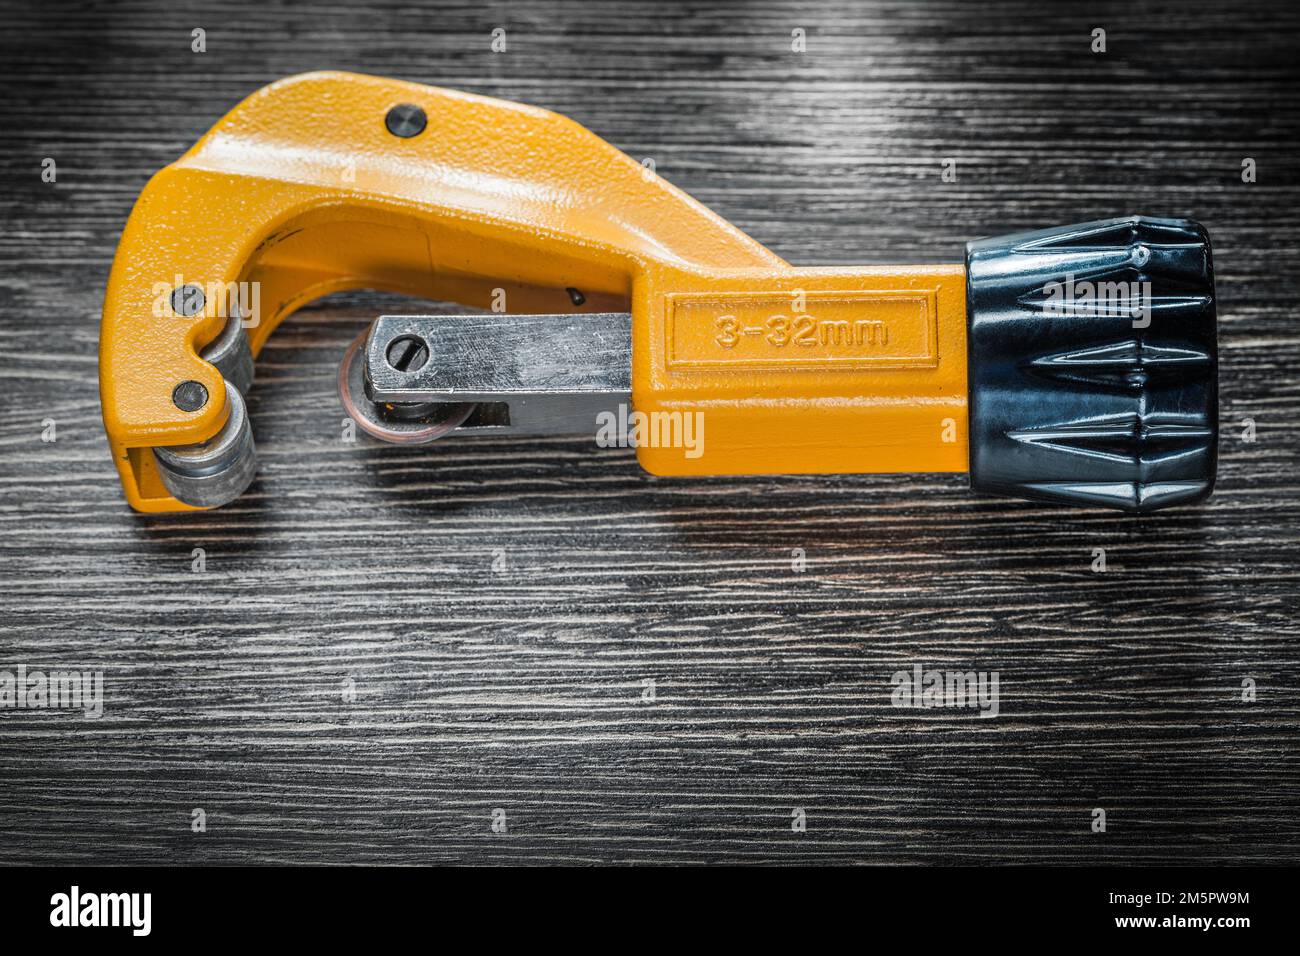 Plumbing pipe cutter on wooden board. Stock Photo